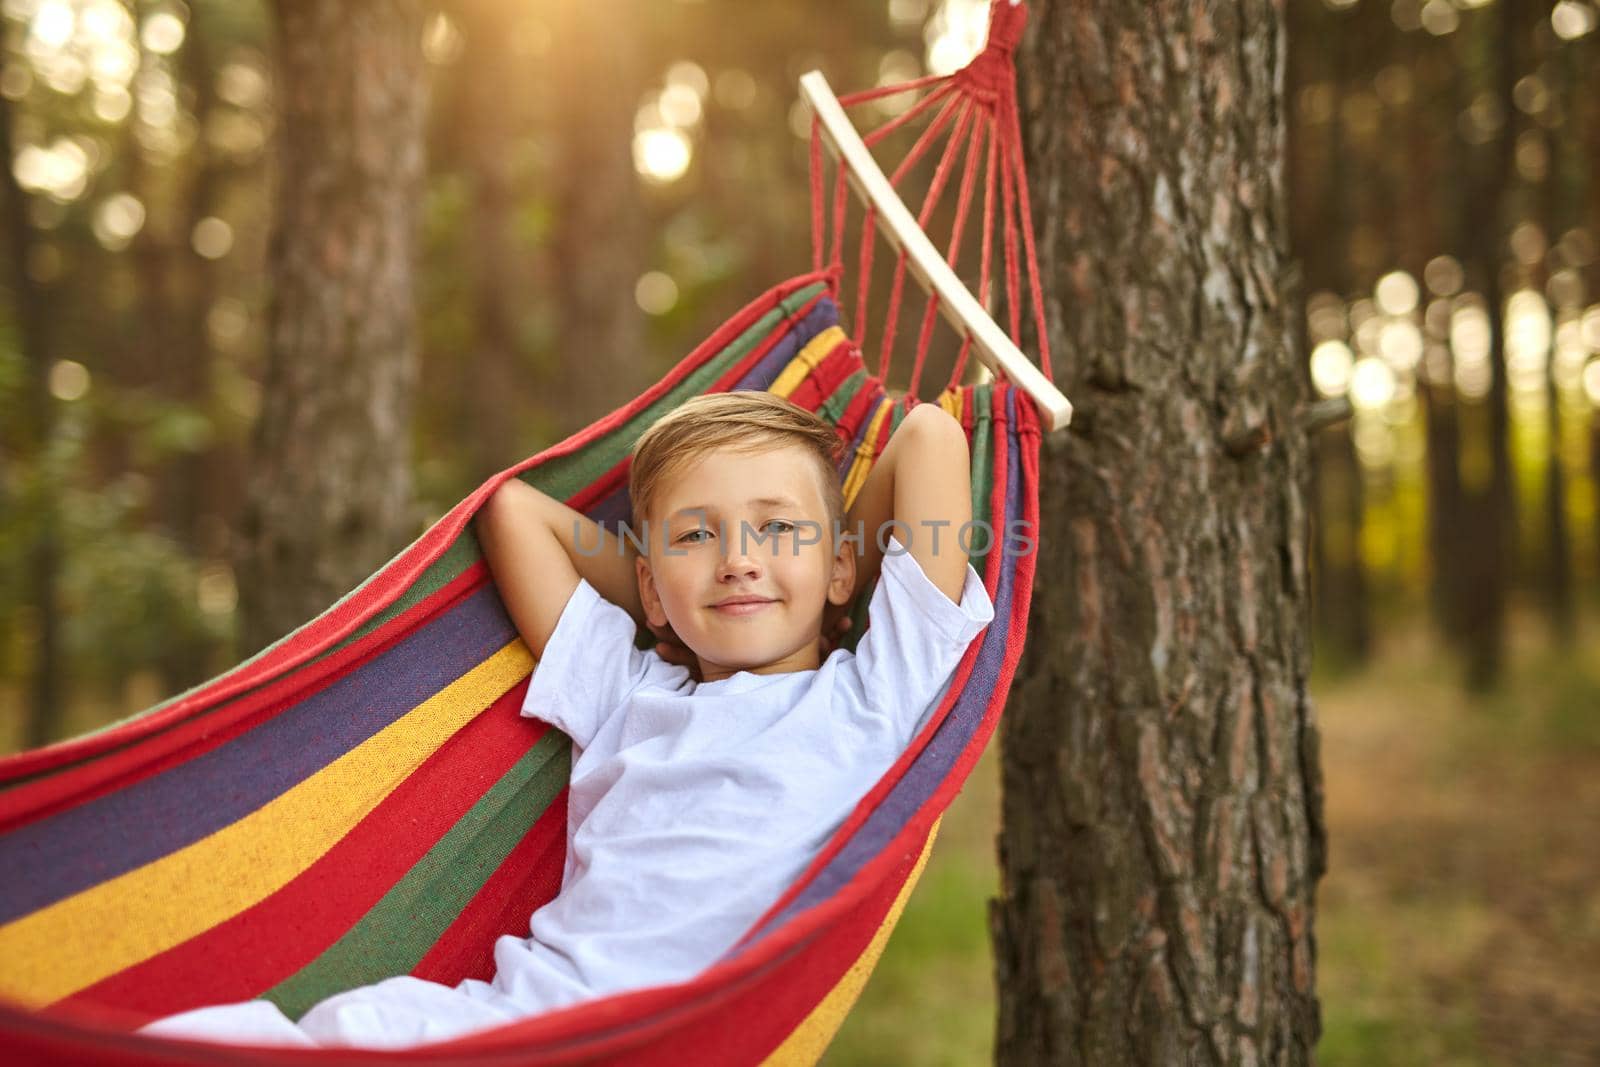 Cute little blond caucasian boy having fun with multicolored hammock in backyard or outdoor playground. Summer active leisure for kids. Child on hammock. Activities and fun for children outdoors